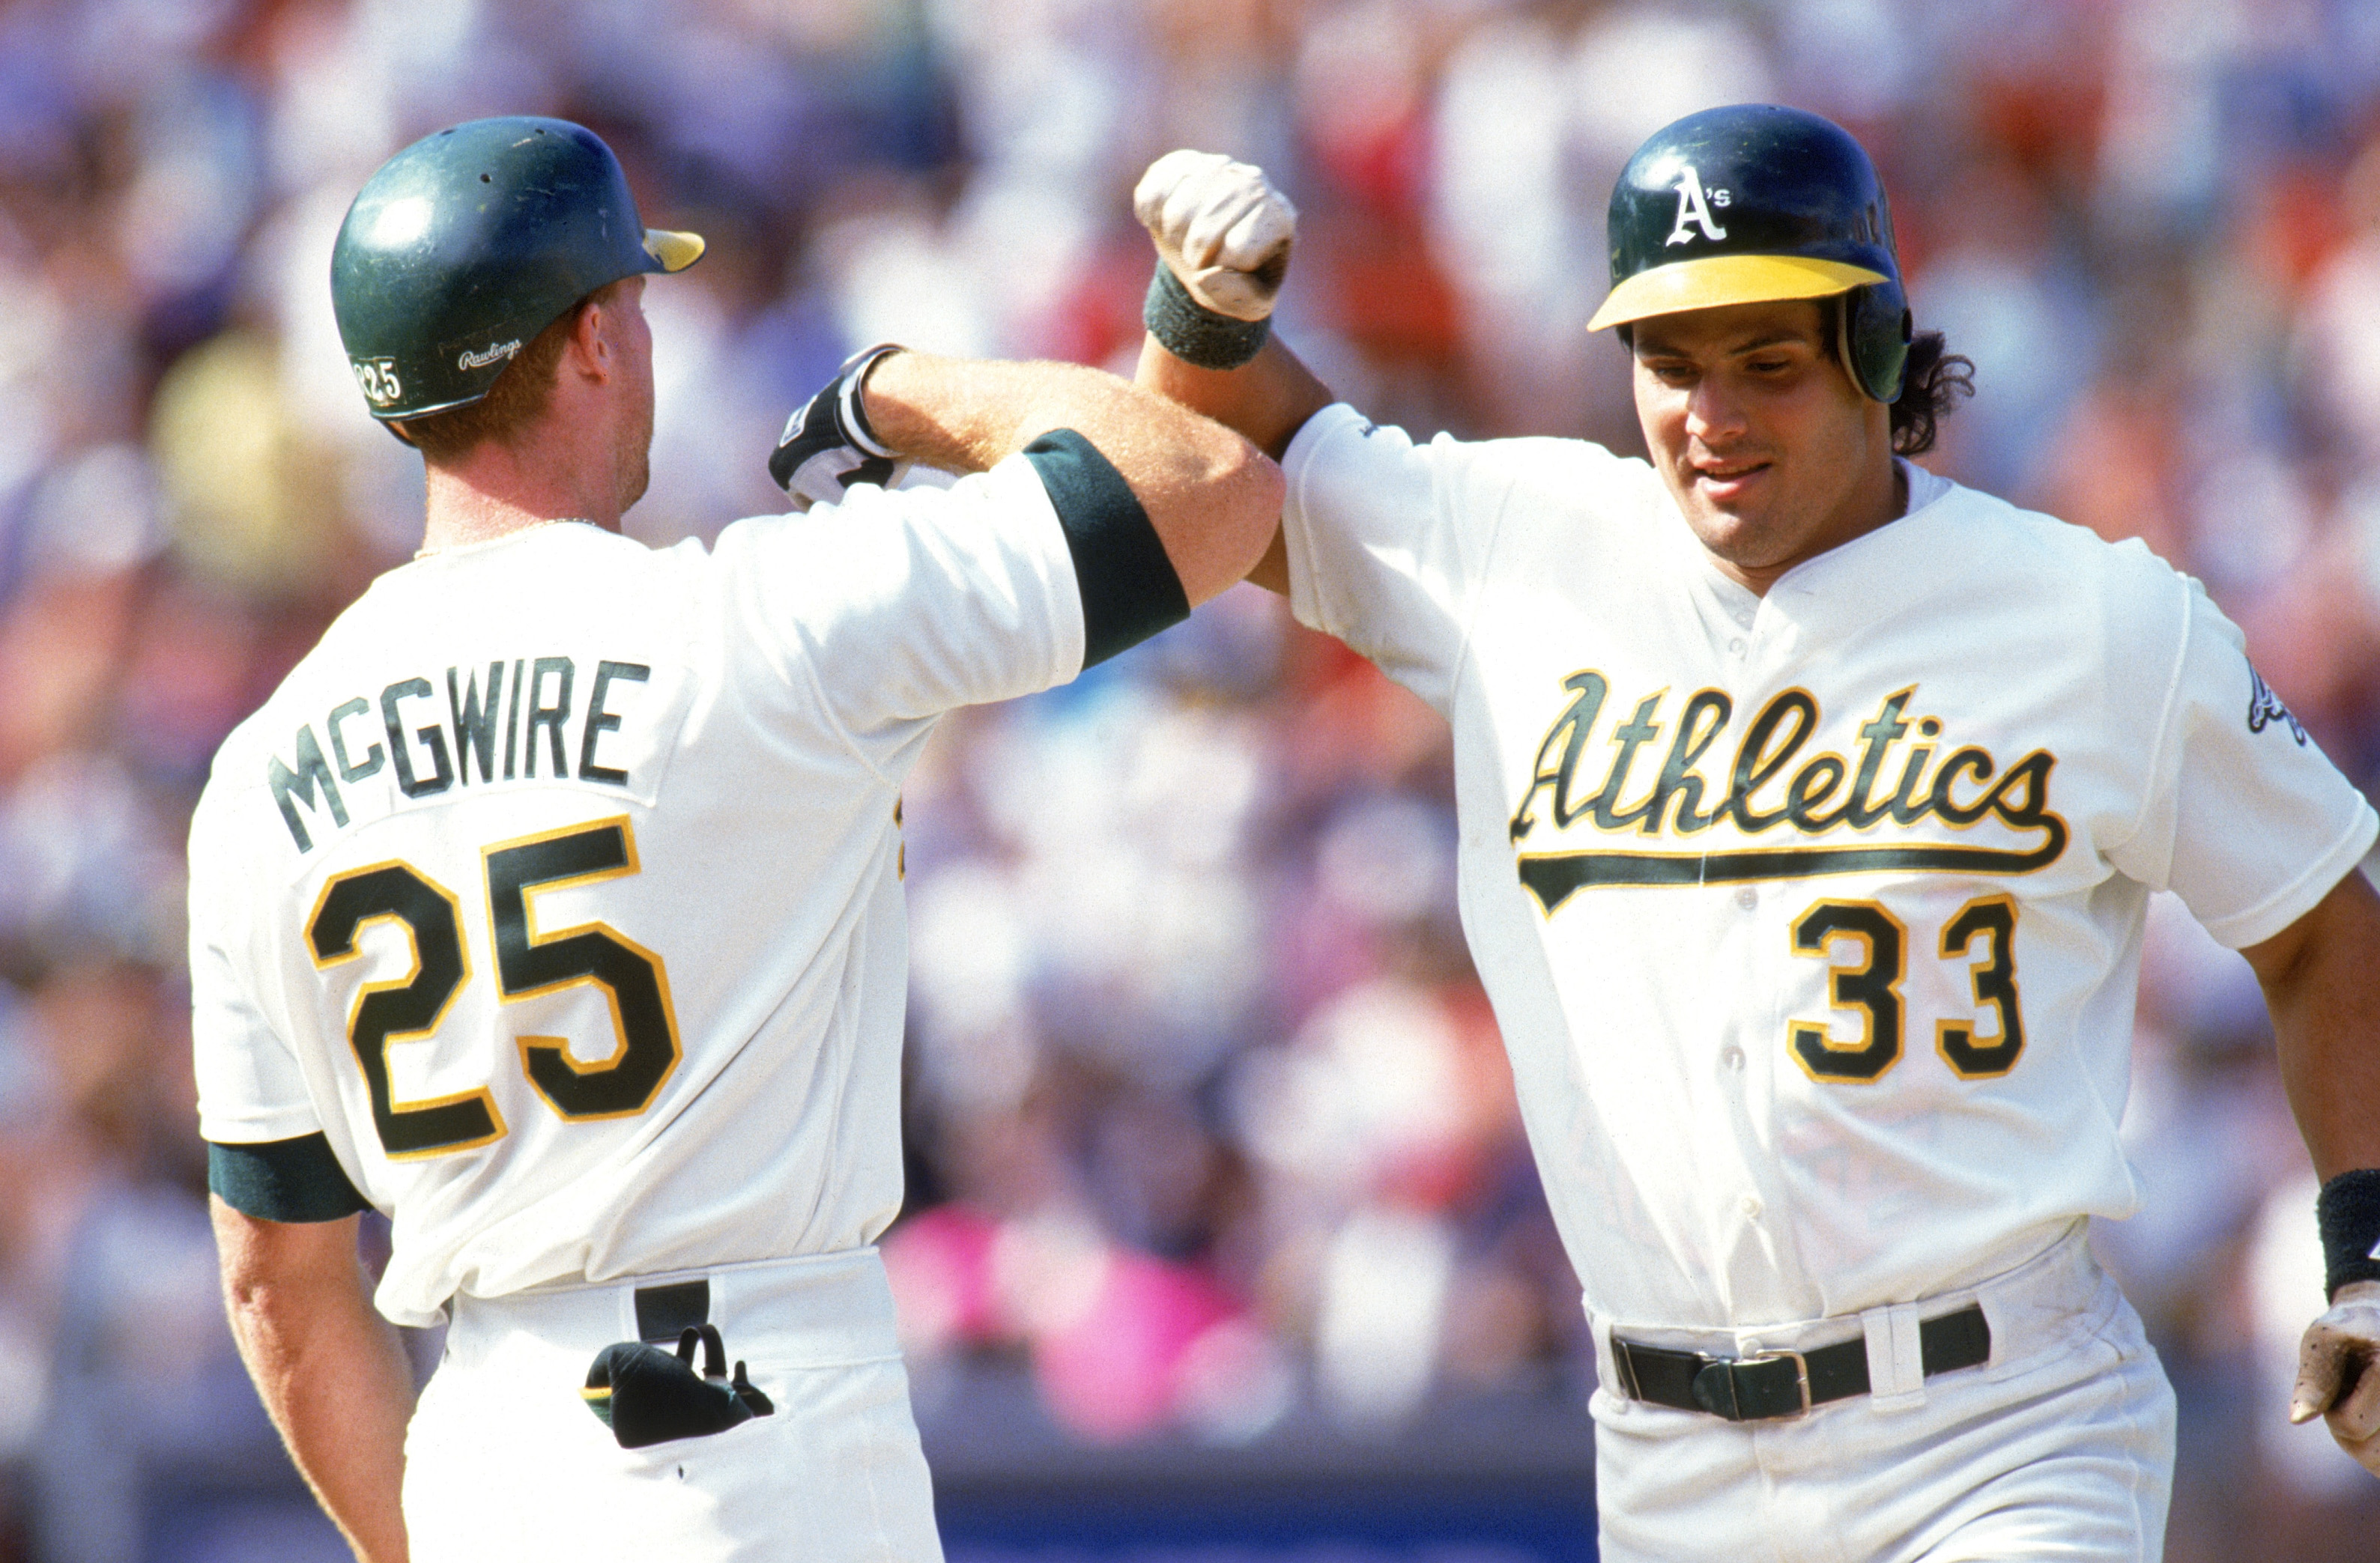 Mark McGwire and Jose Canseco Oakland A's Signed Framed 8x10 Photo –